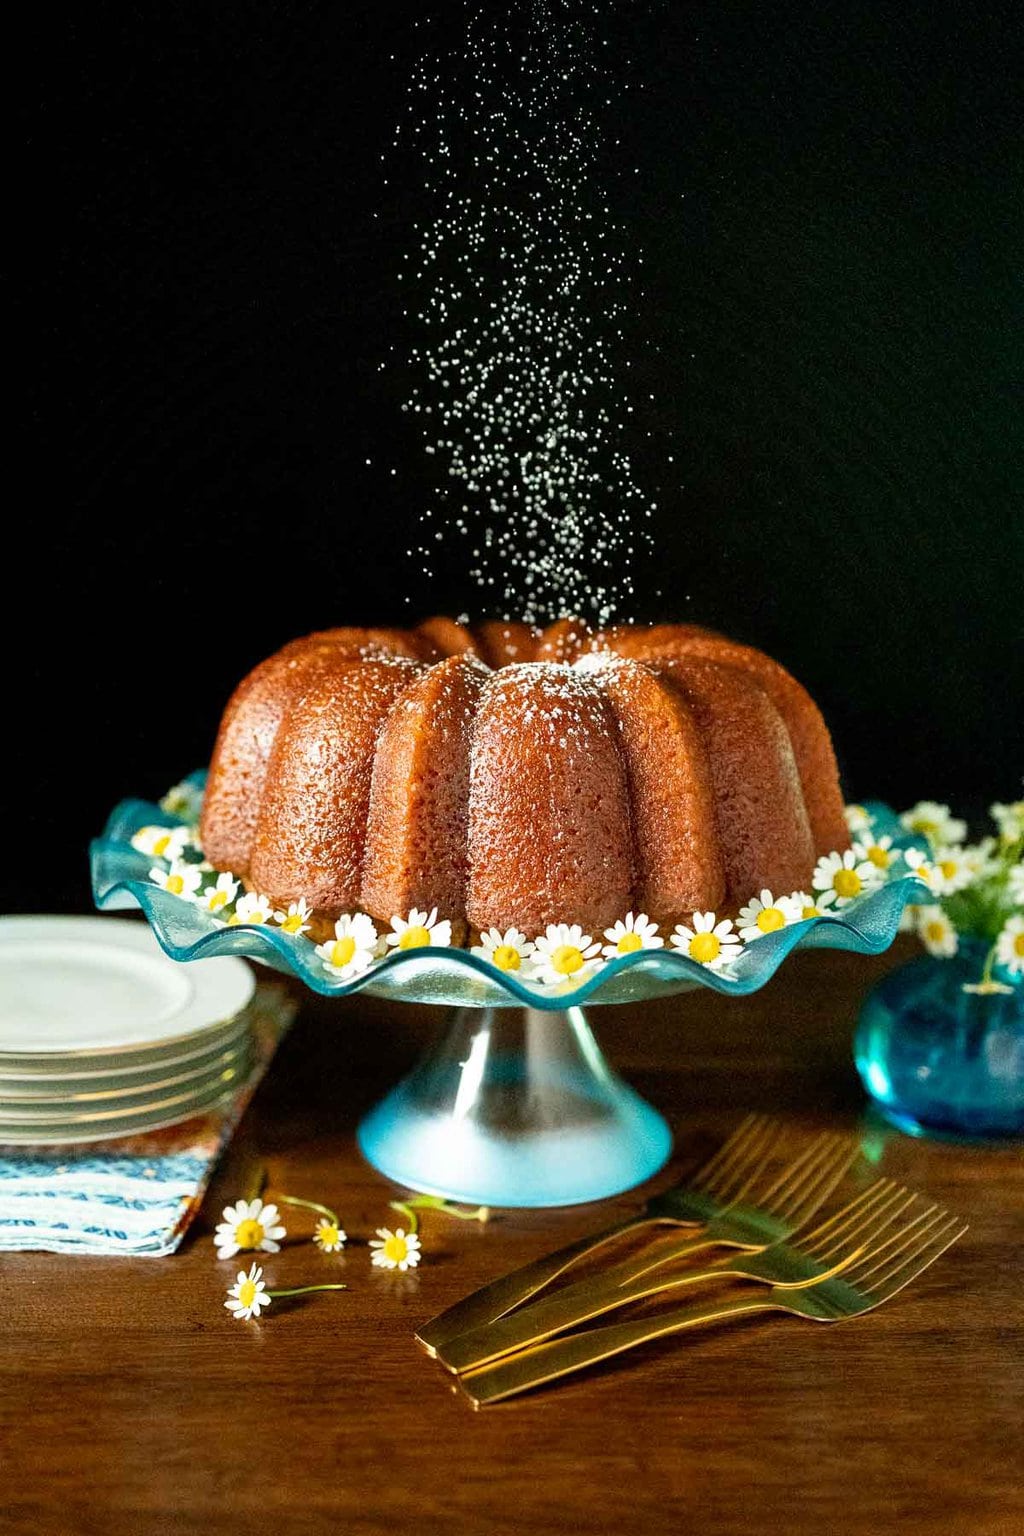 Vertical photo of a Ridiculously Easy Apple Cider Bundt Cake on a turquoise glass pedestal cake stand with powdered sugar being sprinkled over the top in a freeze action shot.